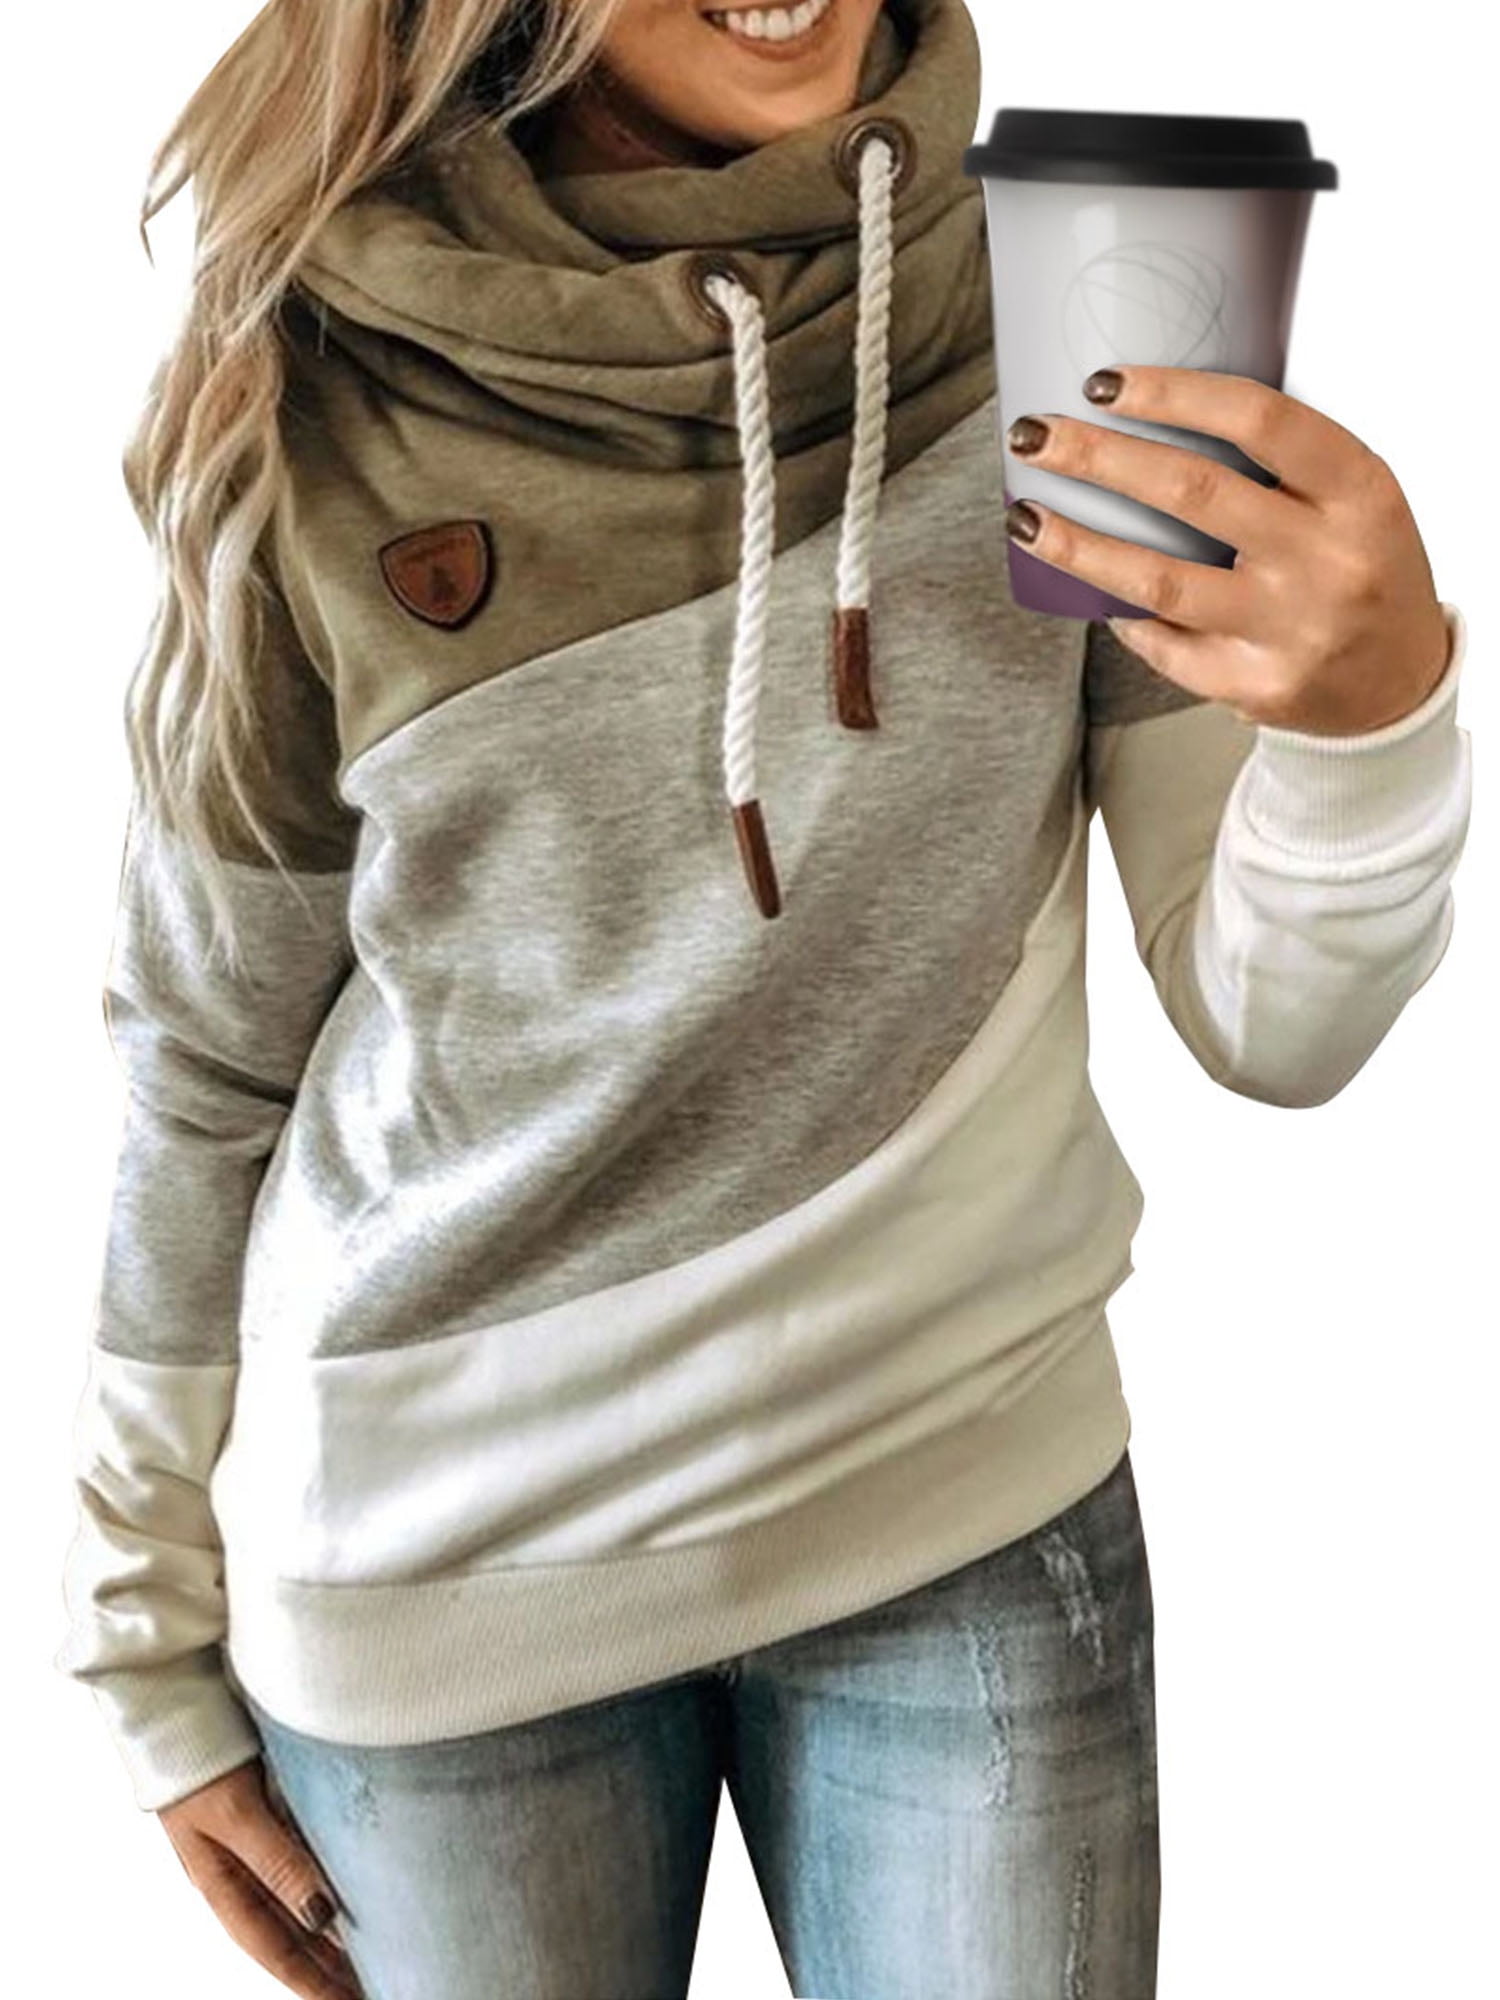 Womens Fashion Cat Print Hooded Sweatshirt Cut Graphic Pullover Hoodie Long Sleeve Plus Size Fall Tops S-5XL